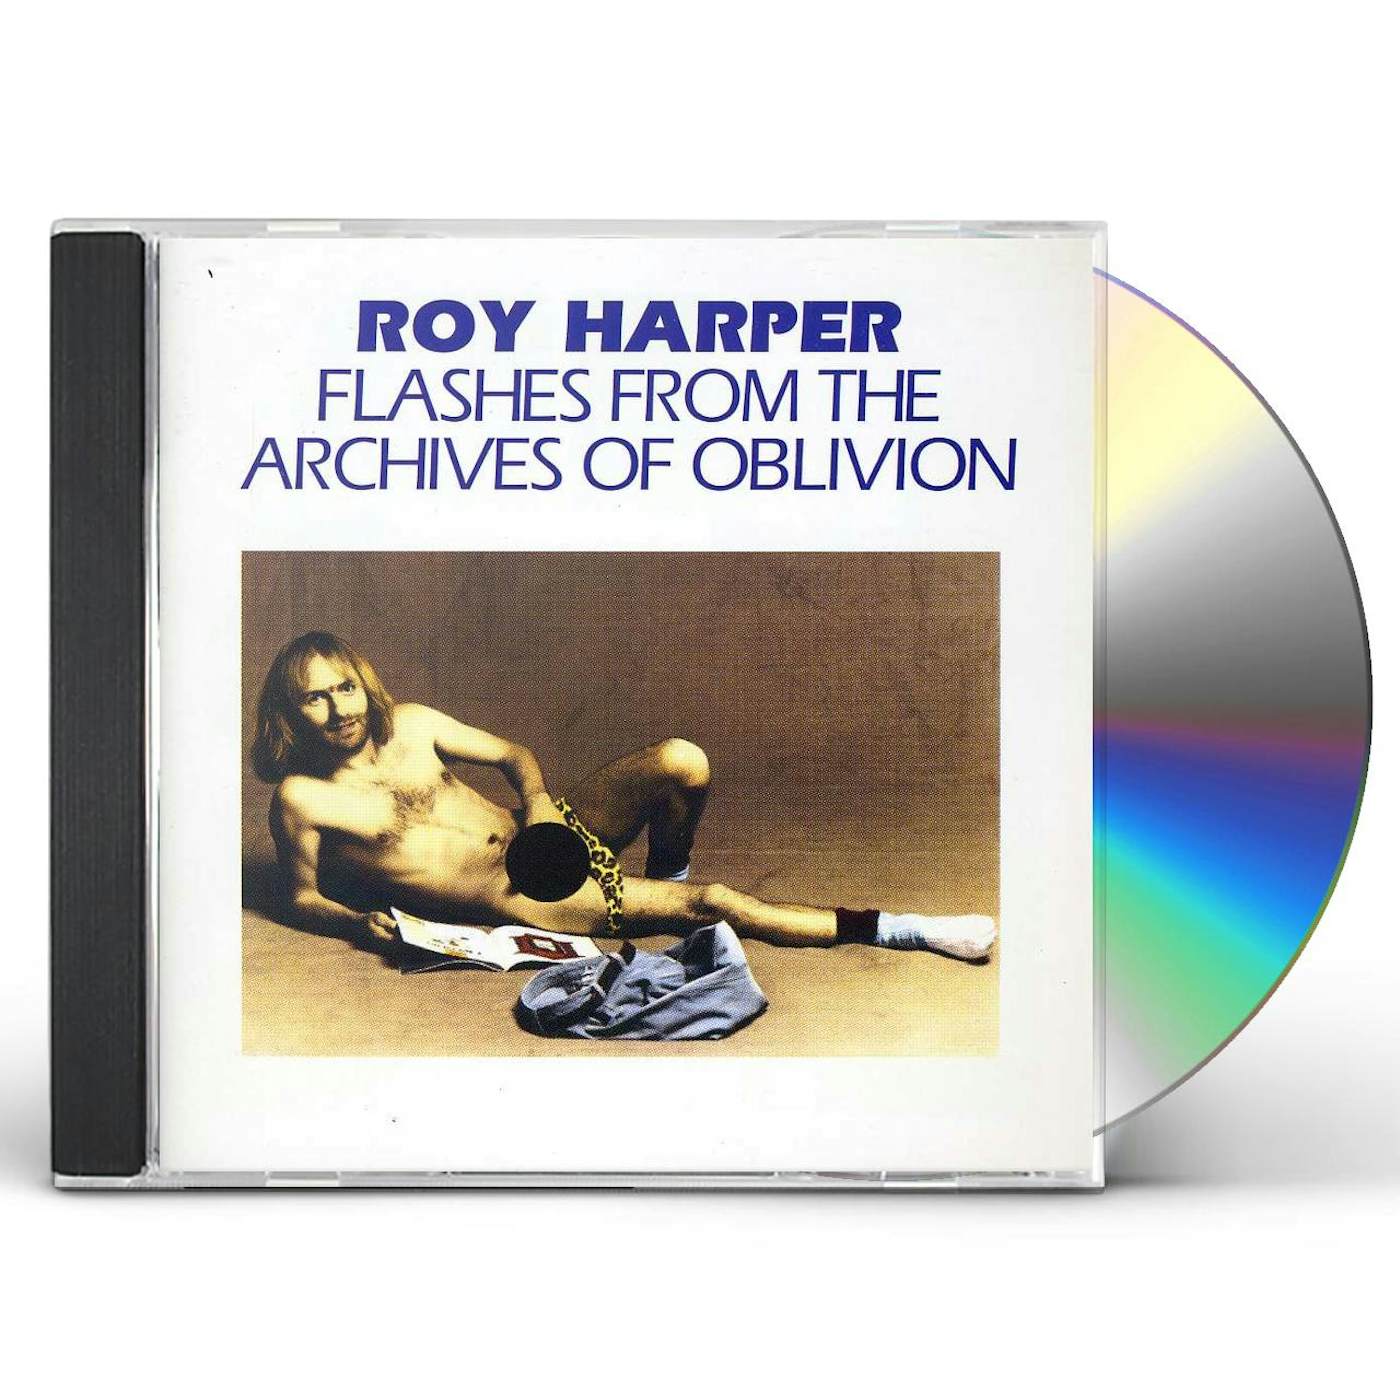 Roy Harper FLASHES FROM THE ARCHIVES OF OBLIVION CD